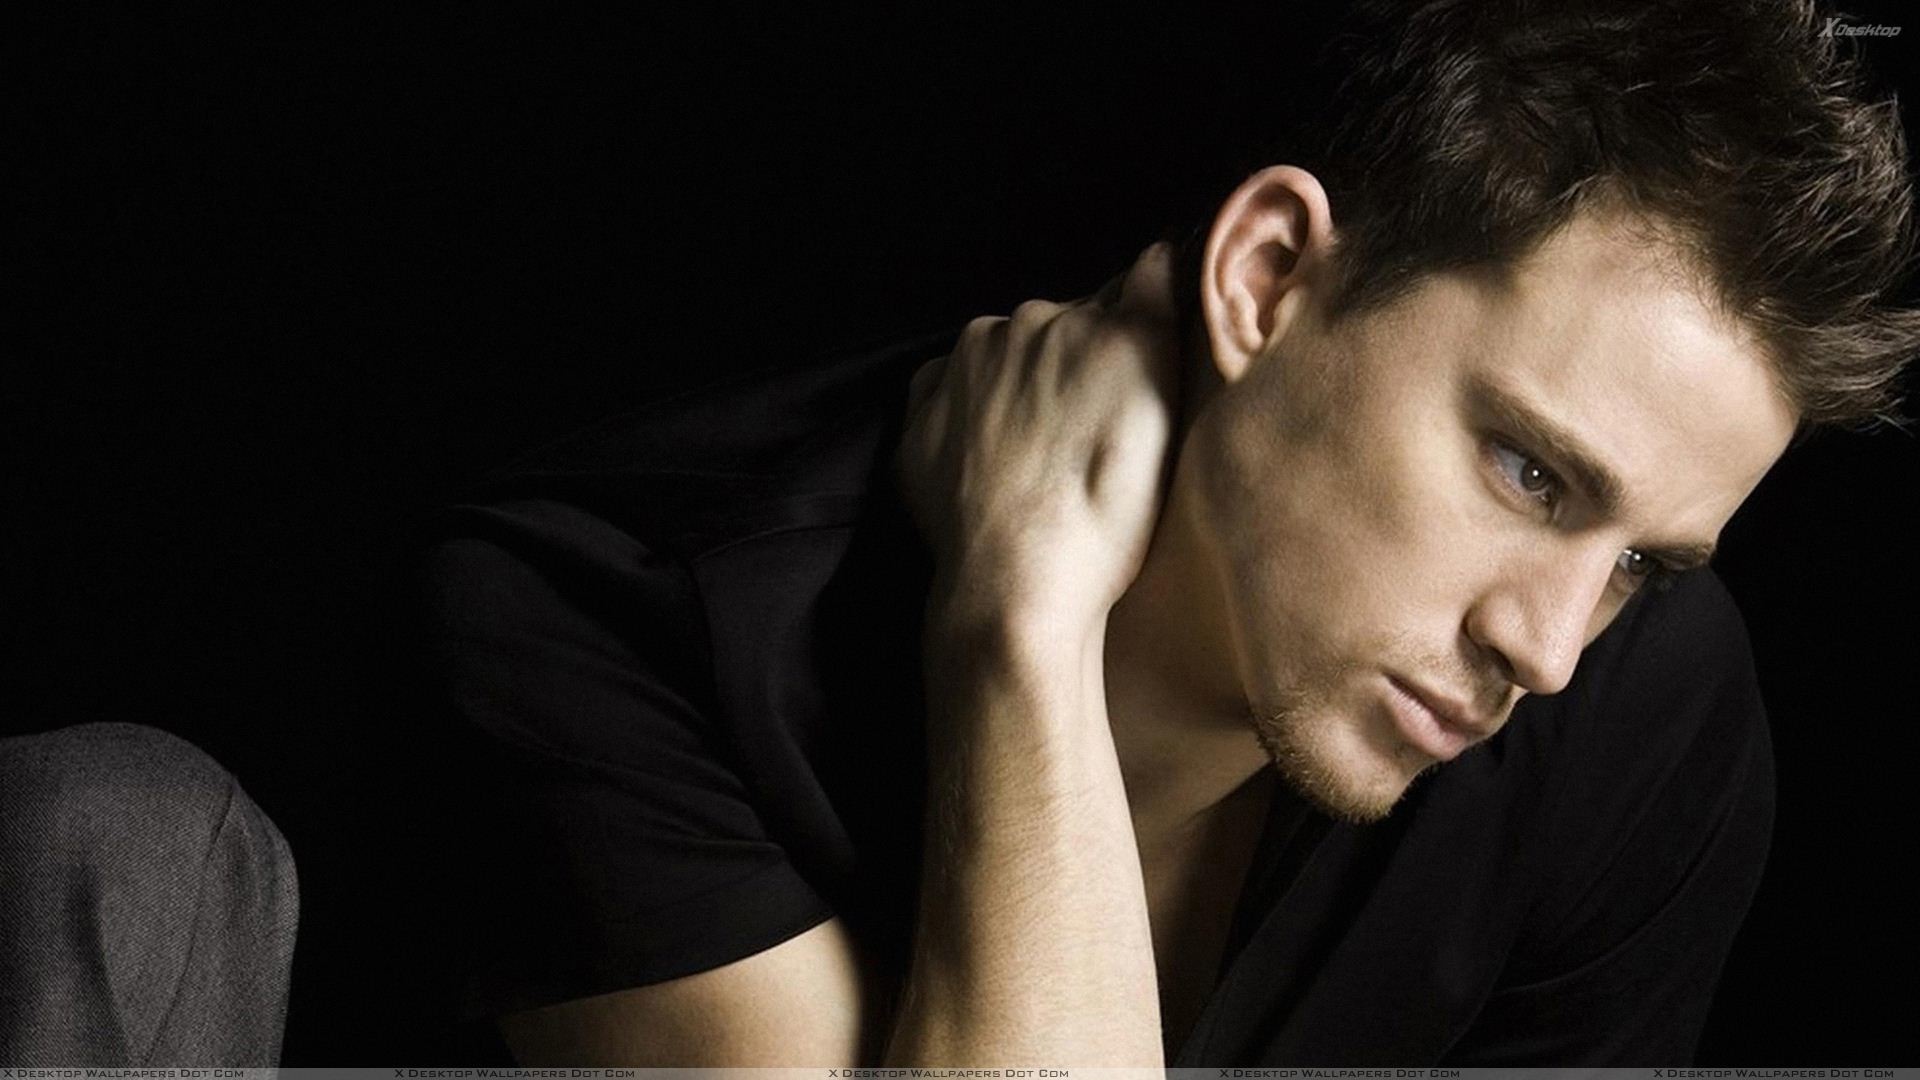 1920x1080 You are viewing wallpaper titled "Channing Tatum ...